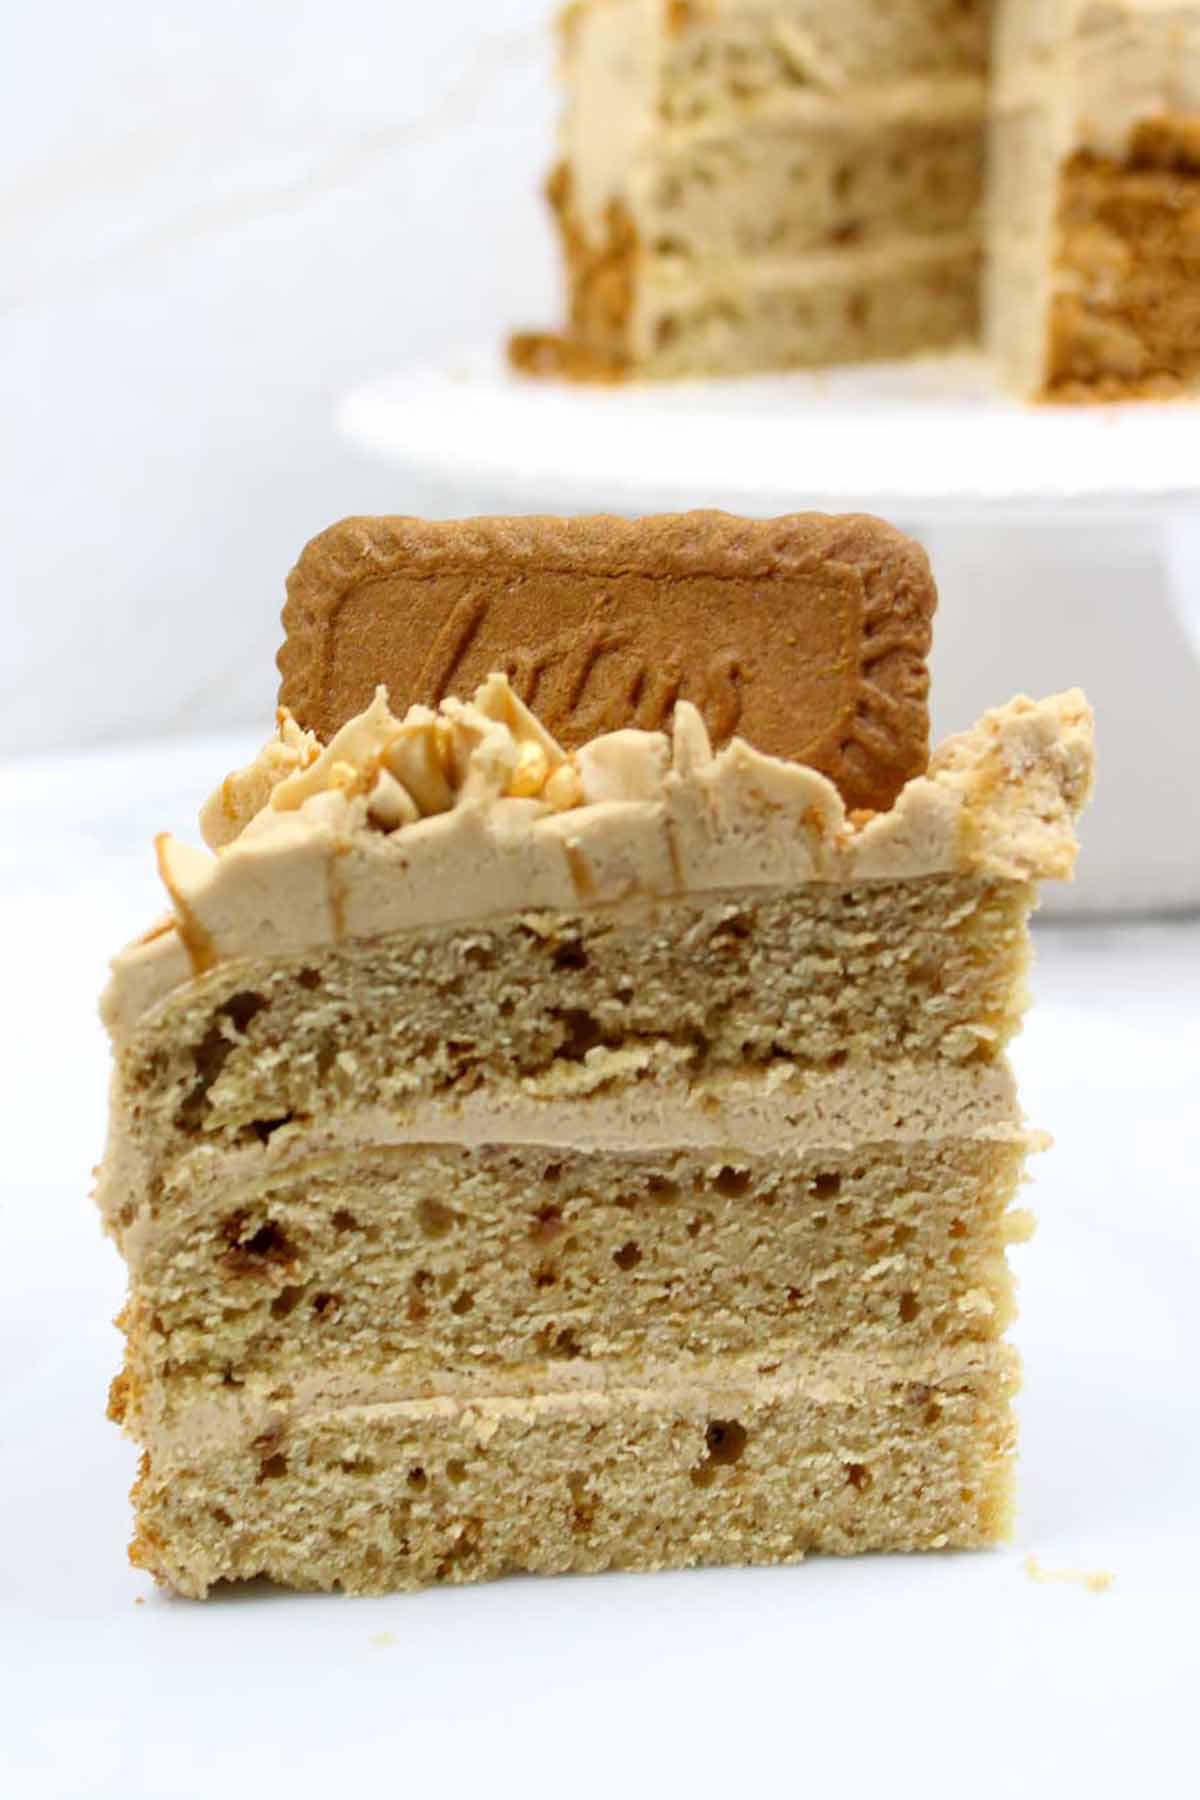 An Upright Slice Of Vegan Biscoff Cake On A Plate